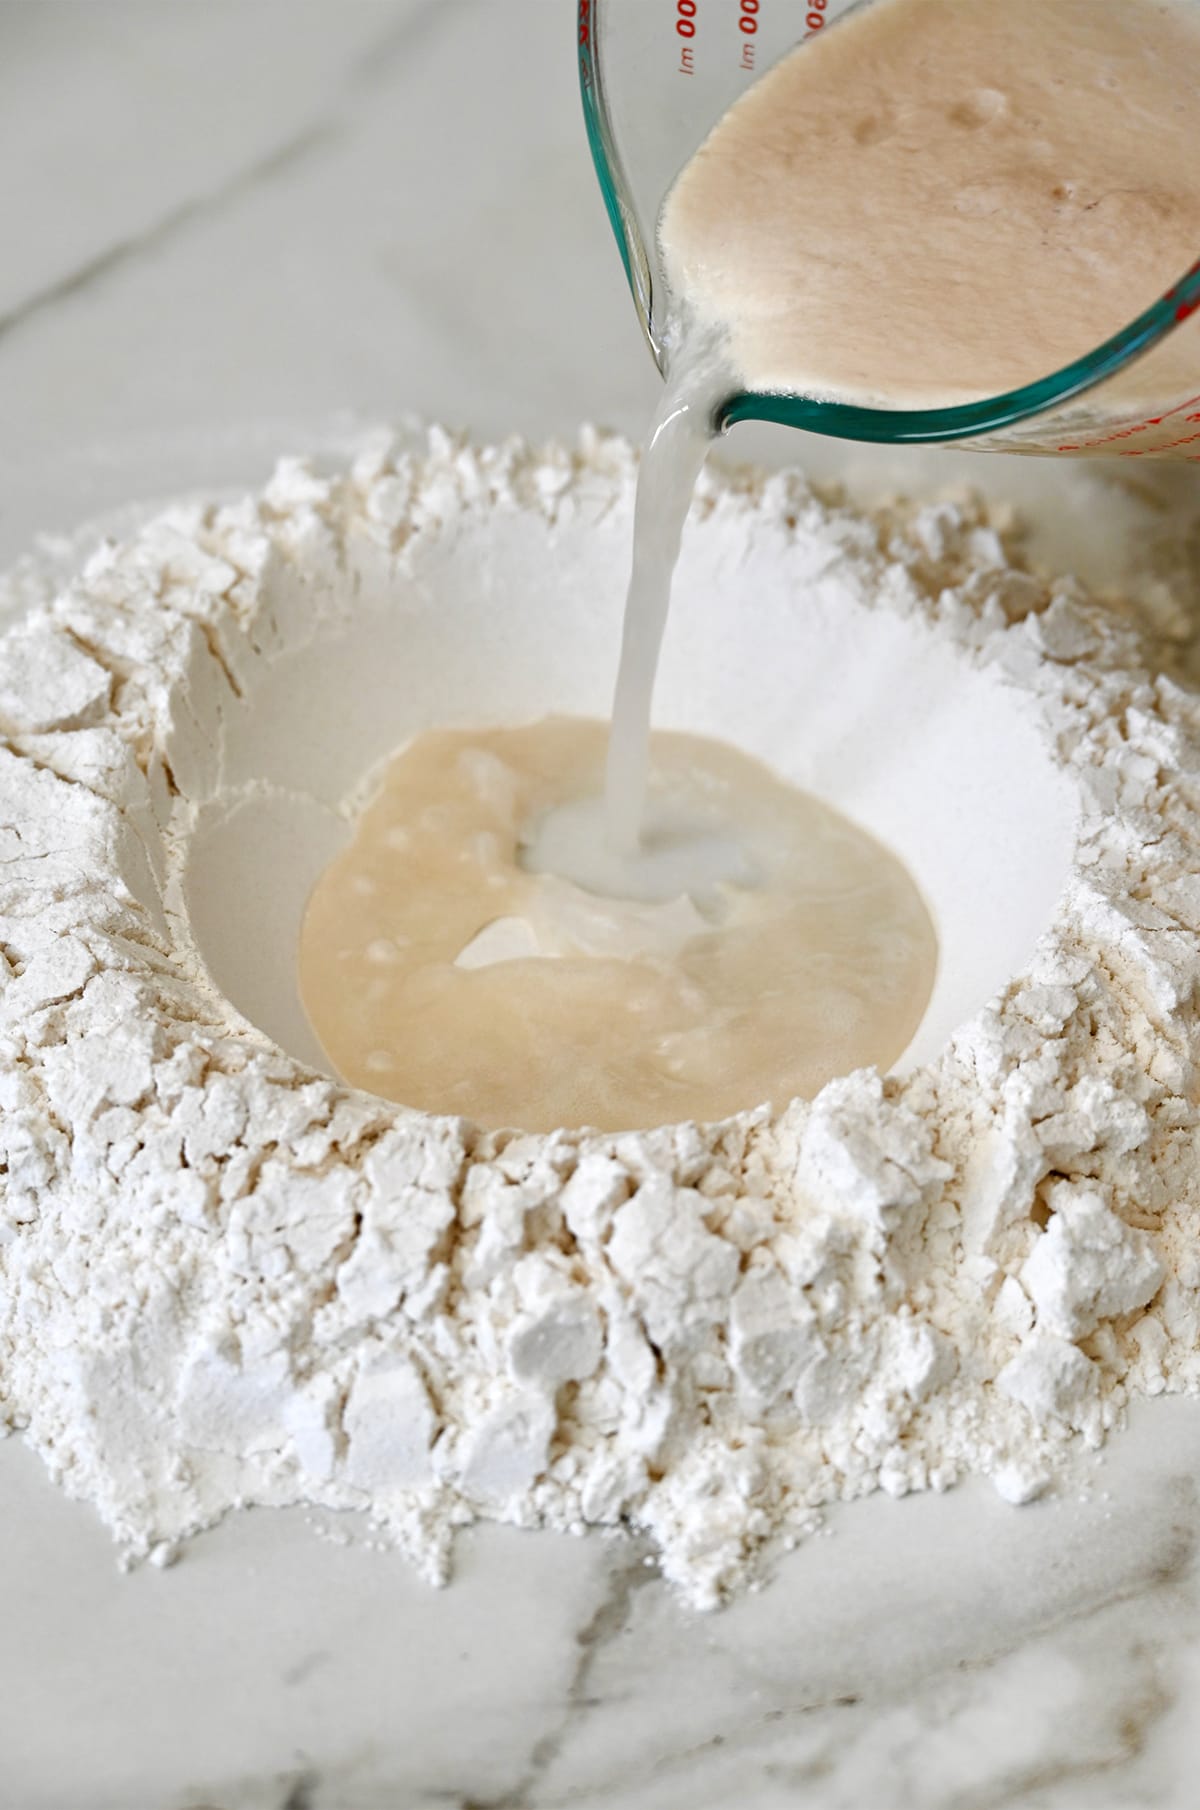 A yeast and water mixture being poured into the well of flour.